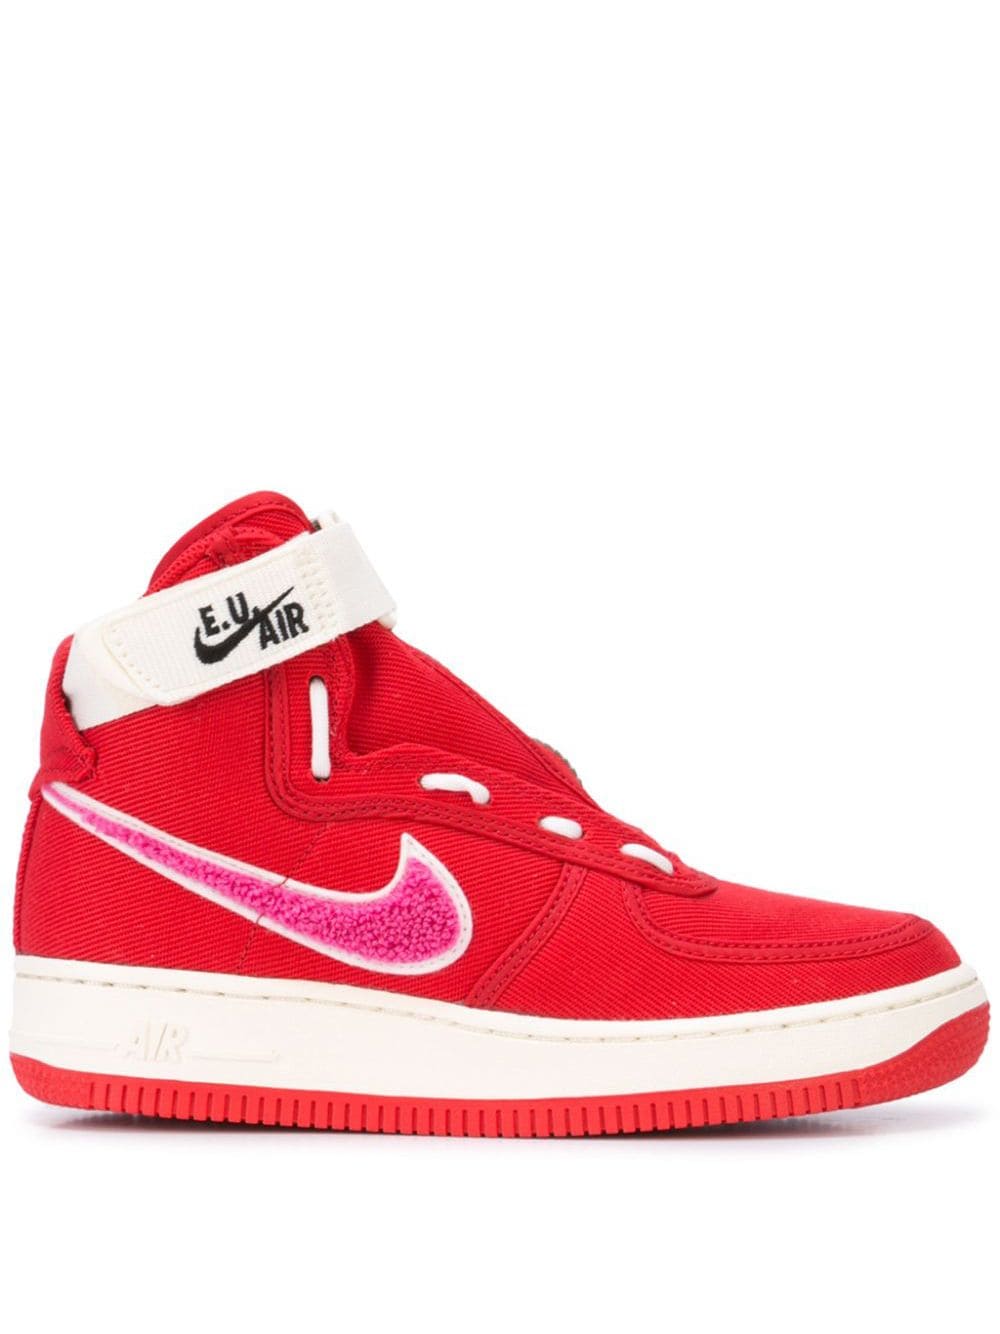 Nike x Emotionally Unavailable Air Force 1 High sneakers - Red von Nike